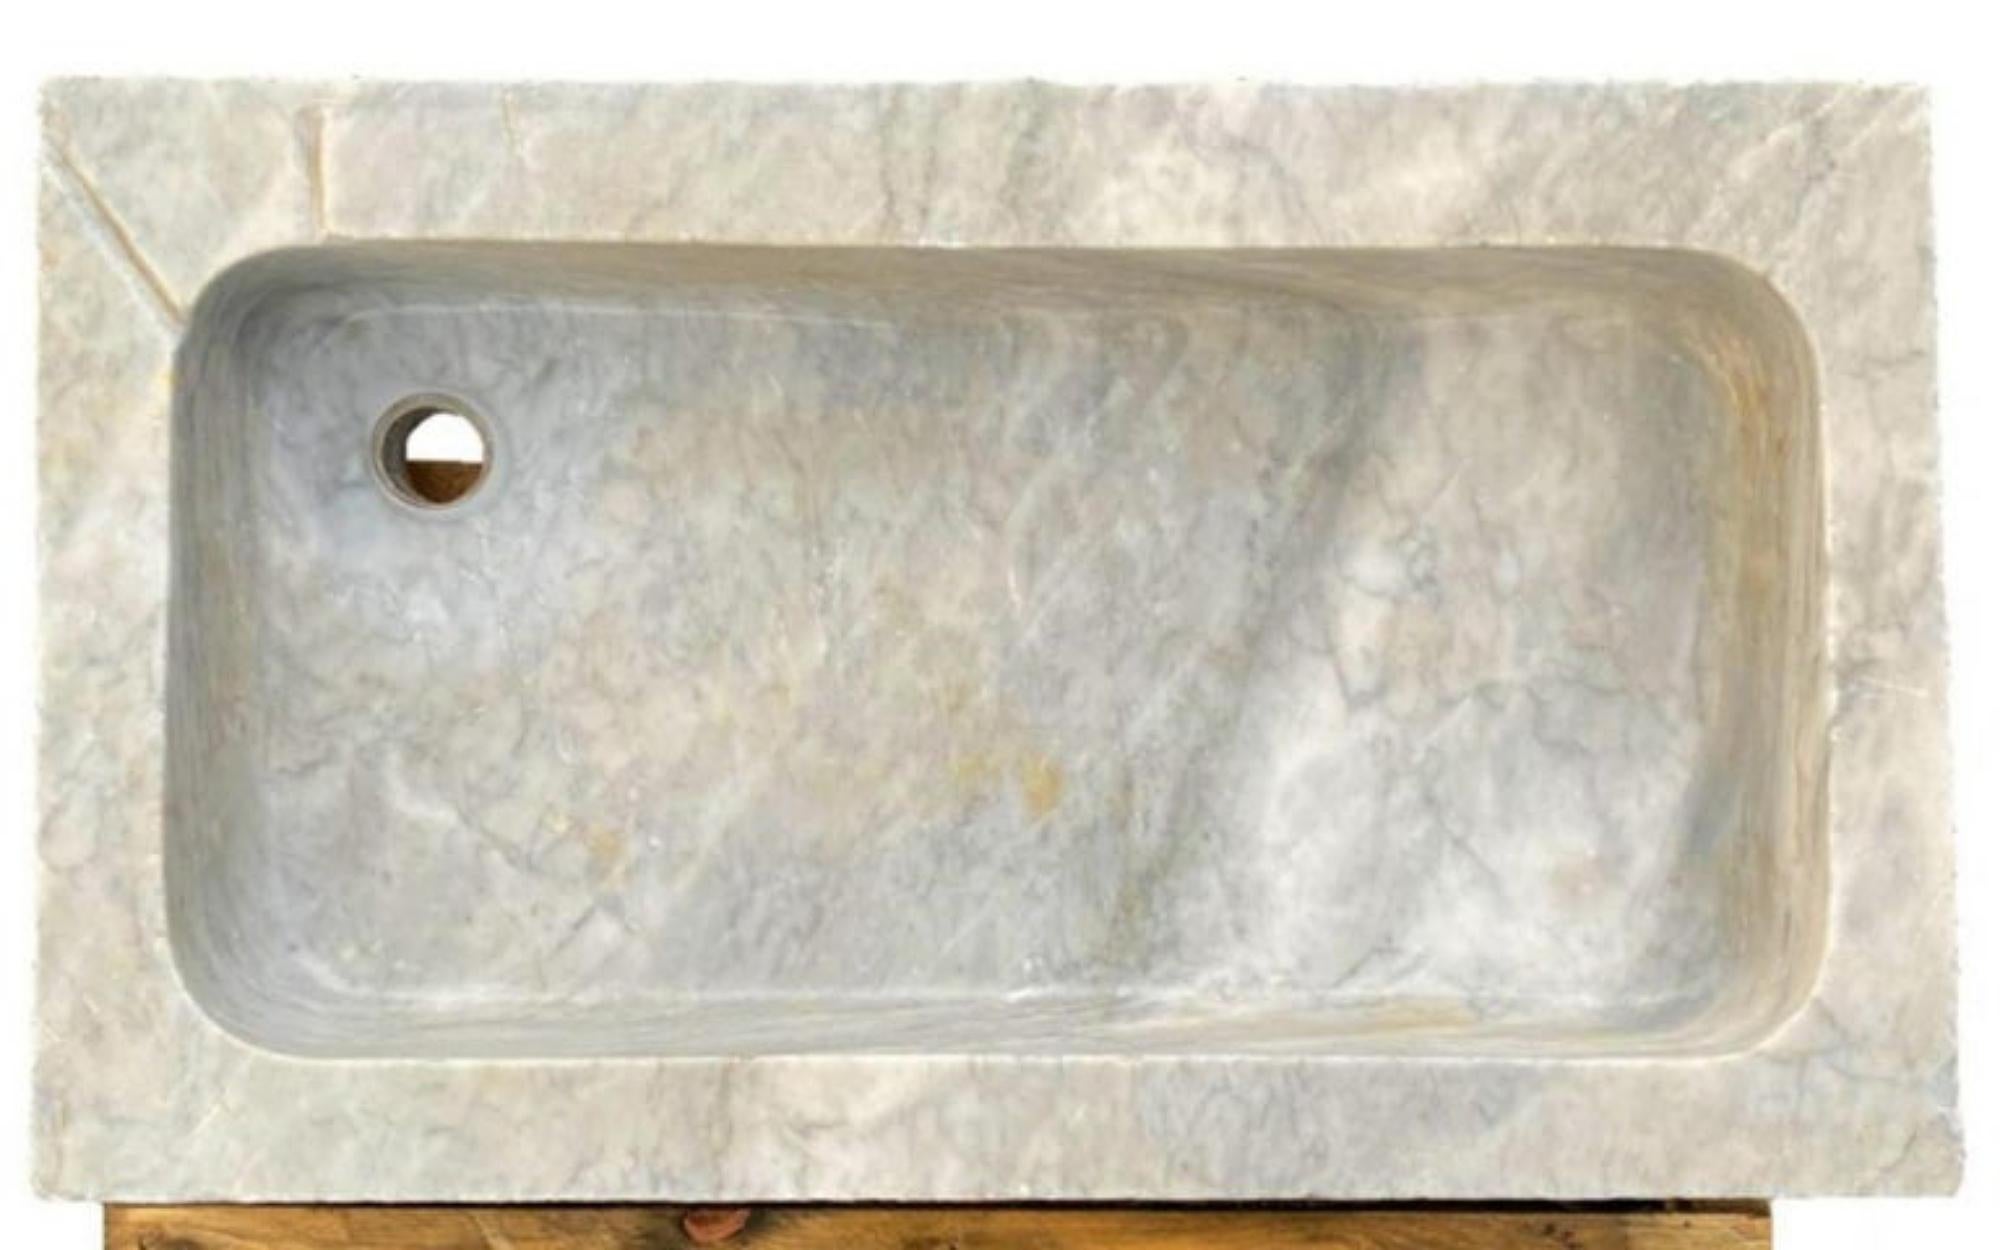 Italian sink in white Carrara marble 20th century
Four sides sanded by hand.
Roughing of the stone, carried out by the stonemason using a tool called a beam.
Measures: height 14cm
width 50cm
length 80 cms
internal depth of the basin 9